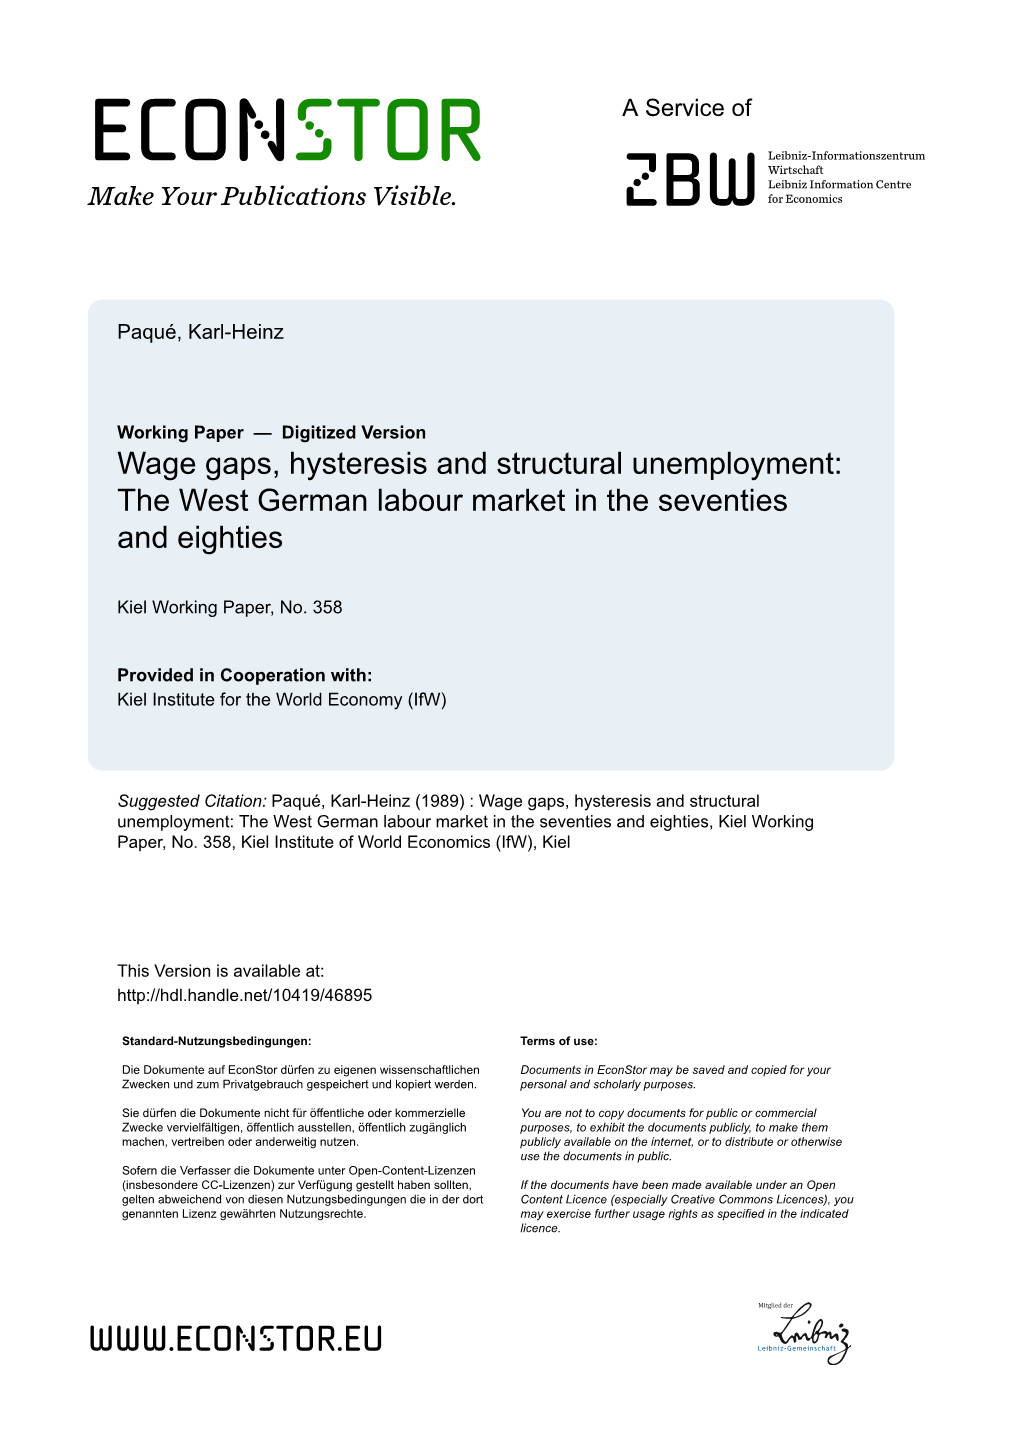 Wage Gaps, Hysteresis and Structural Unemployment: the West German Labour Market in the Seventies and Eighties